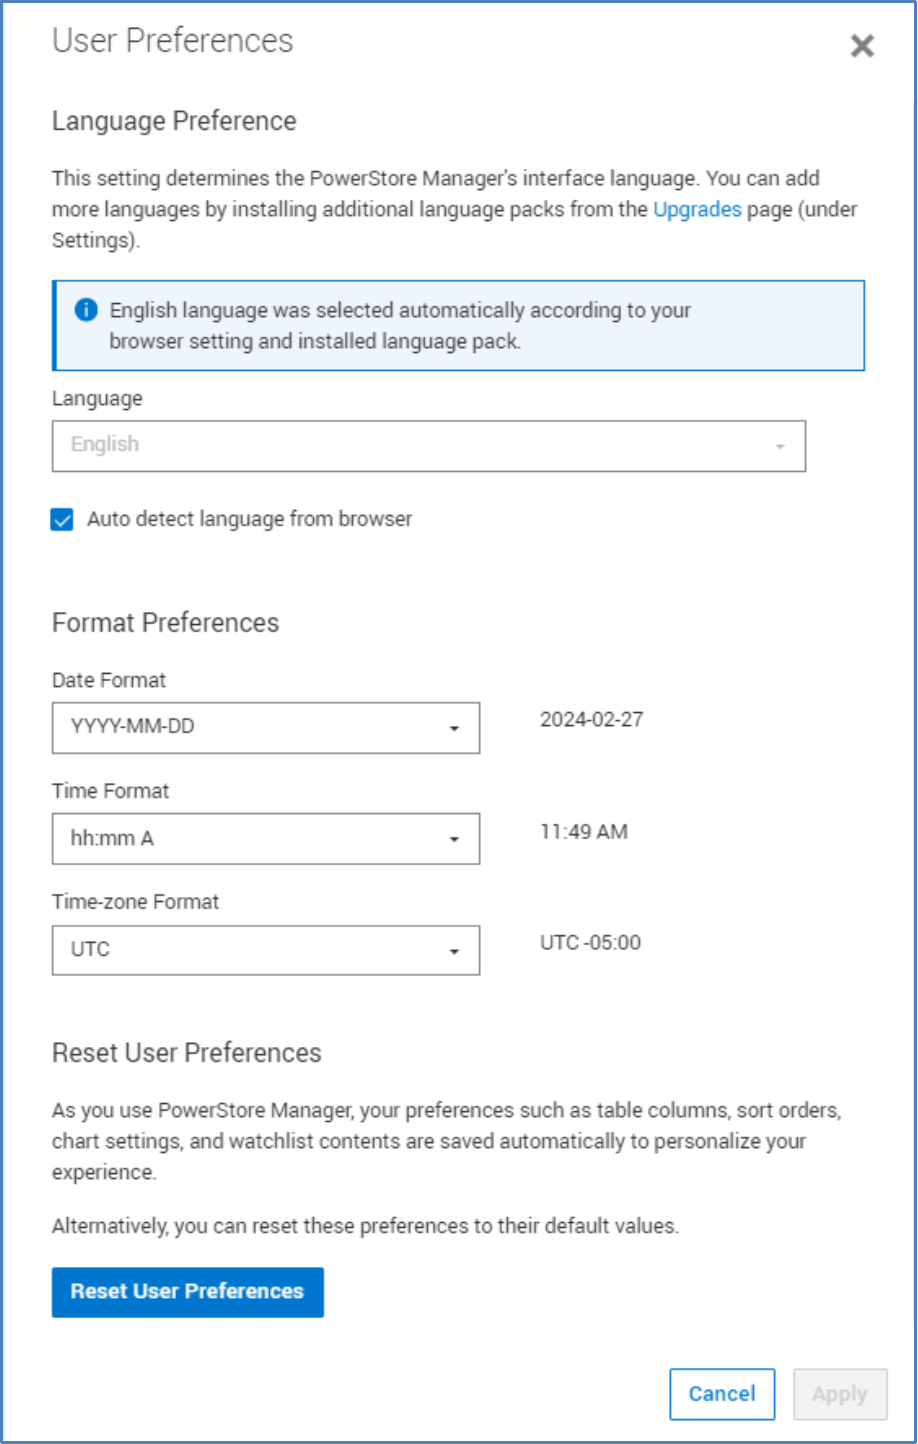 To be more accessible to users around the world, users have the option to install language packs, to change the language of PowerStore Manager. Users can also adjust the date, time, and time-zone format settings.